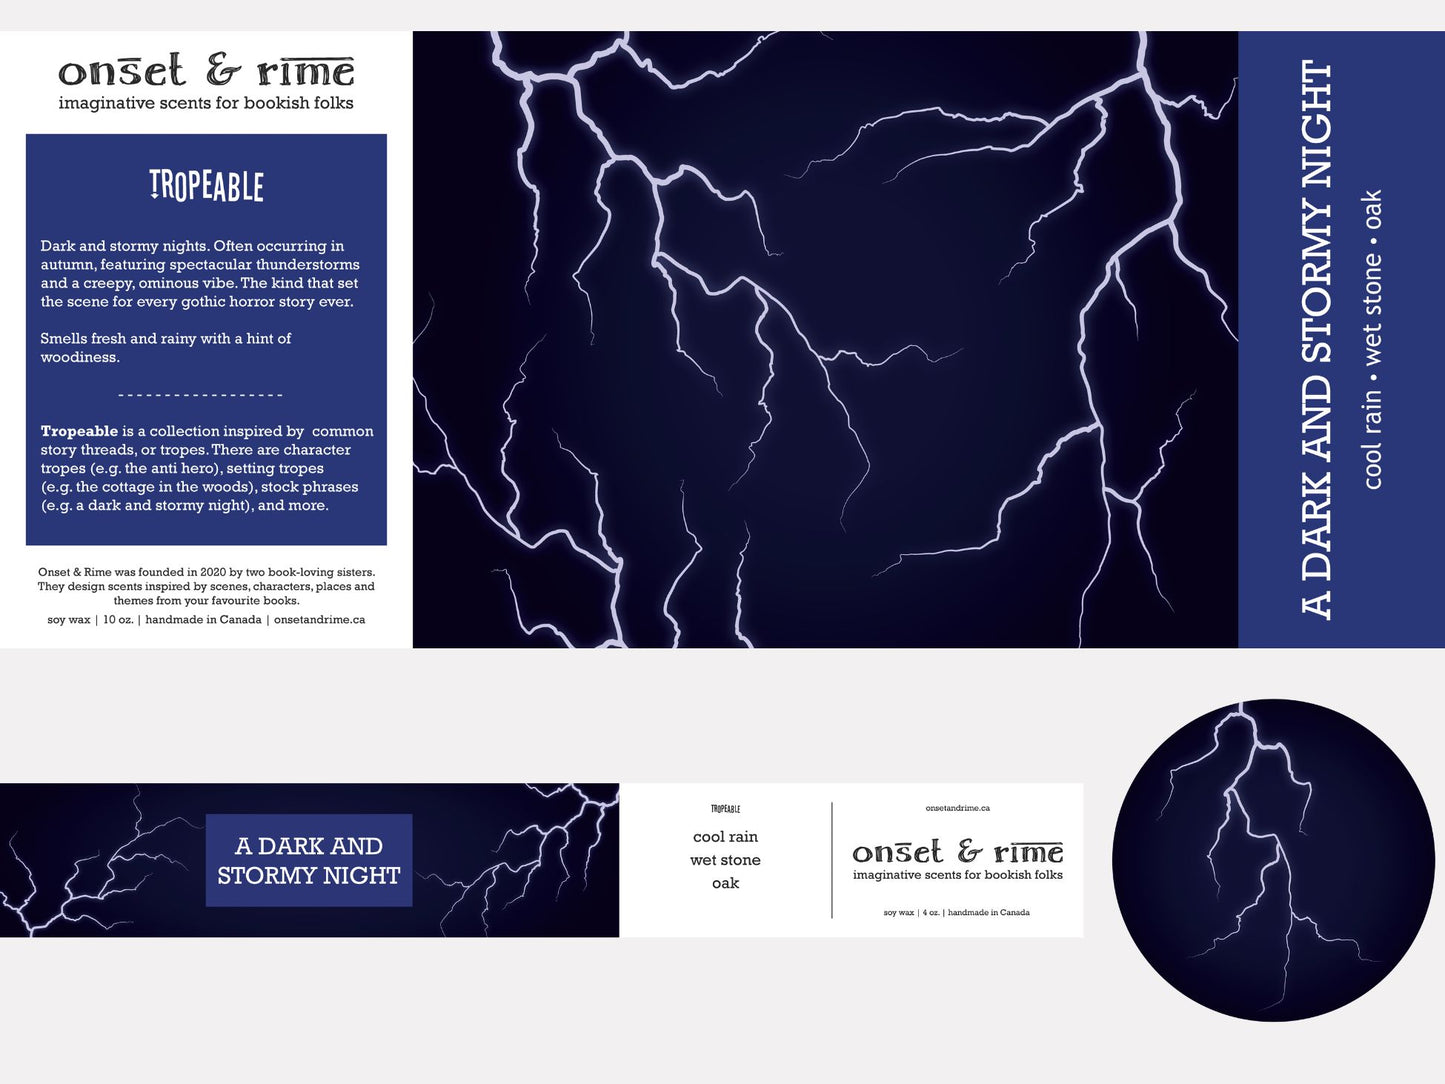 A close up view of the label for the Onset & Rime rain scented candle called "A Dark and Stormy Night". The label is dark blue with white lightning bolts. The text on the label is "A Dark and Stormy Night - Cool Rain, Wet Stone, Oak".